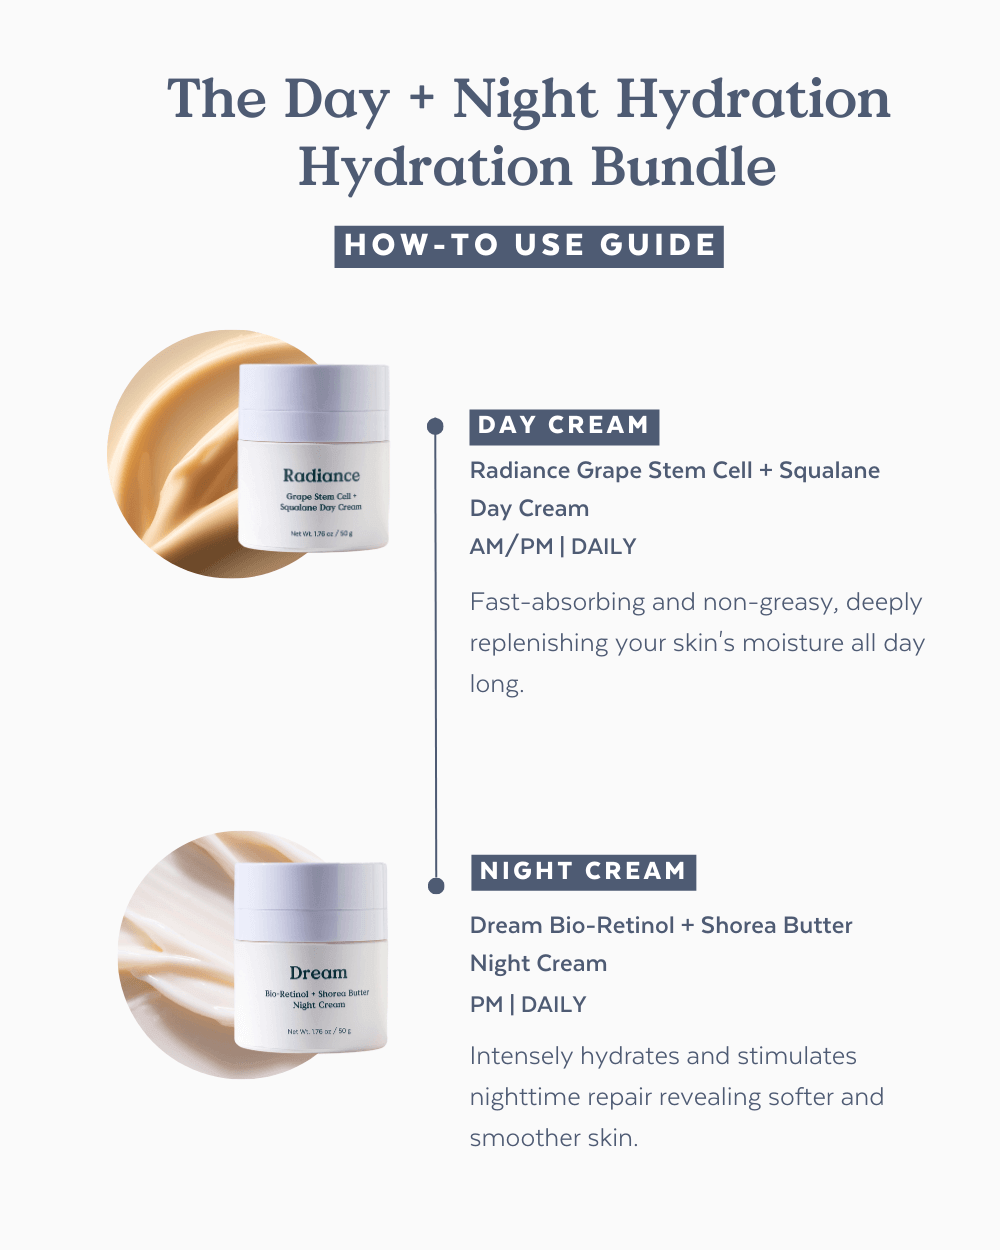 The Day + Night Hydration Bundle Exclusive Offer Three Ships TRIAL KIT Natural Vegan Cruelty-free Skincare